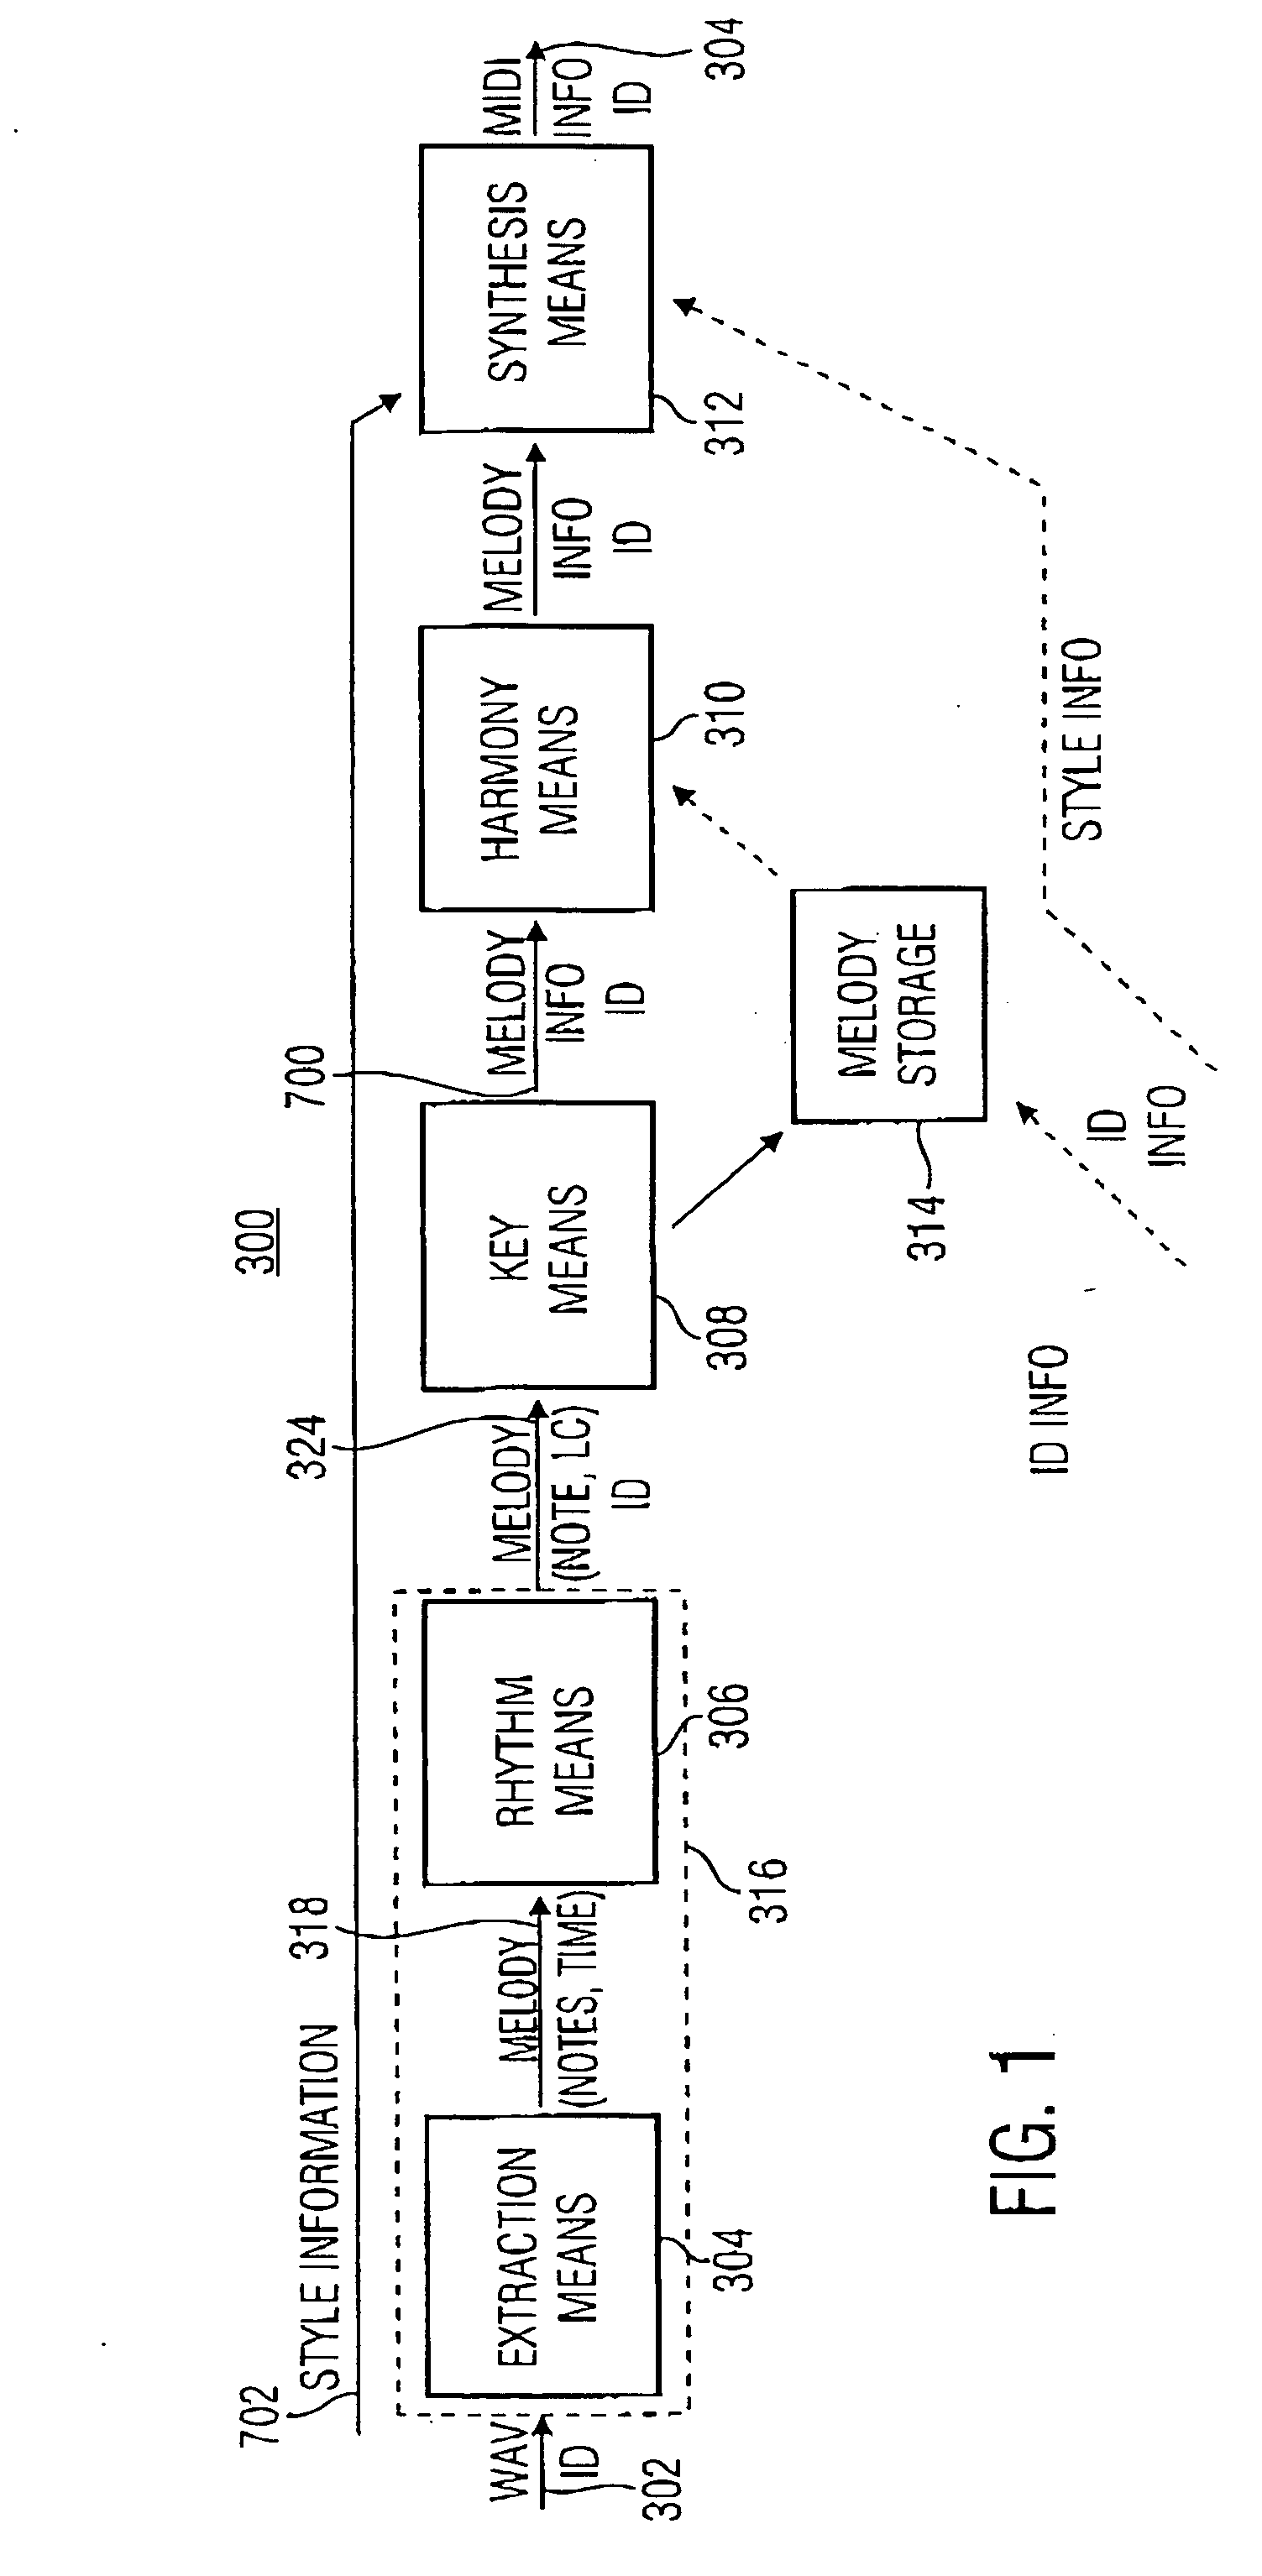 Method and device for extracting a melody underlying an audio signal